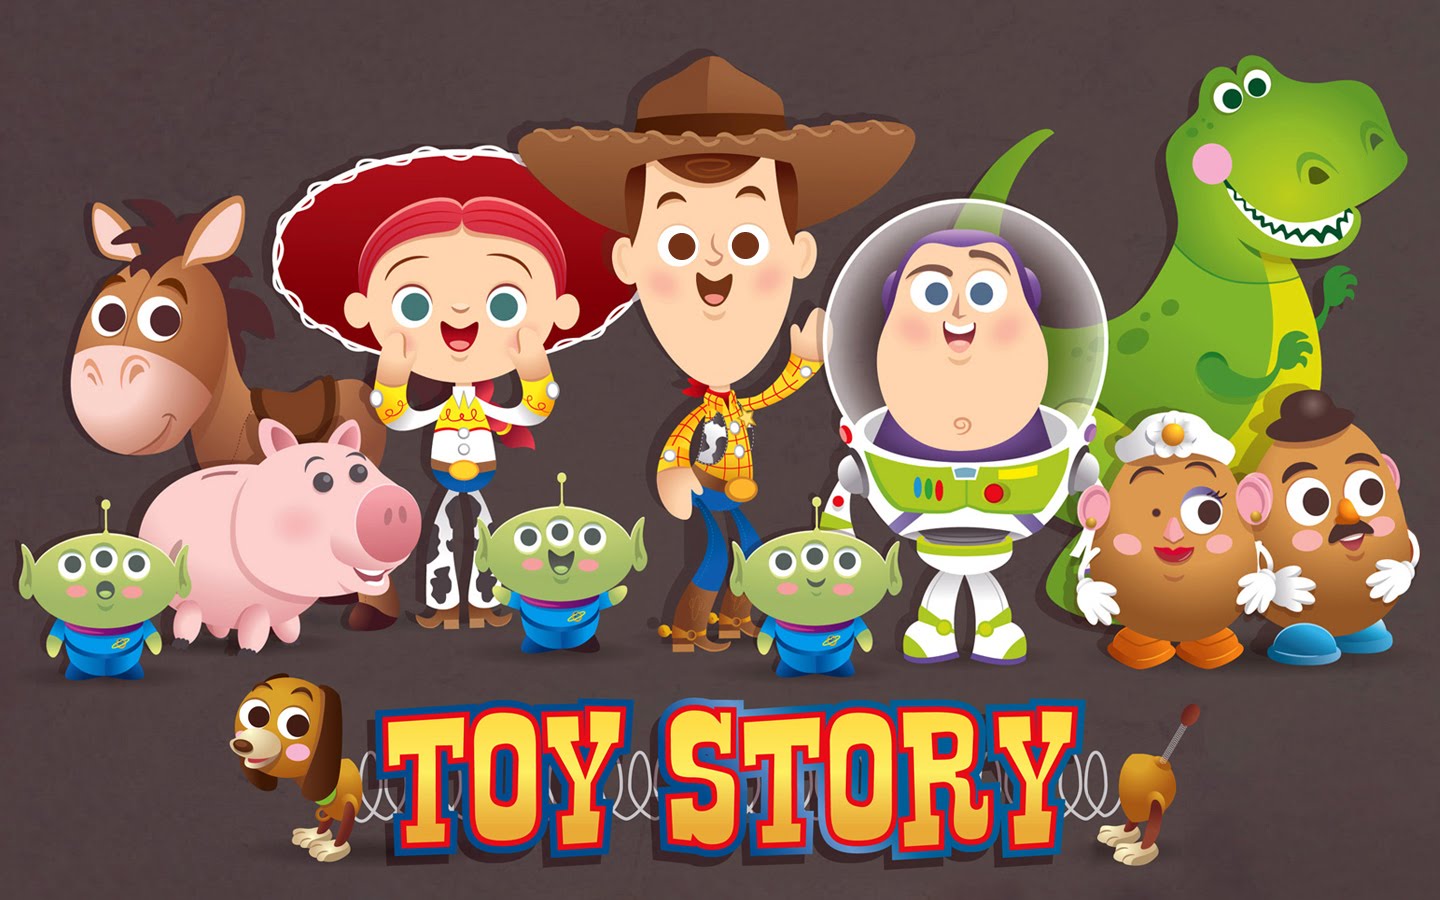 Toy Story 3 Wallpaper Picture 5559 1440x900 px WallpaperFort.com